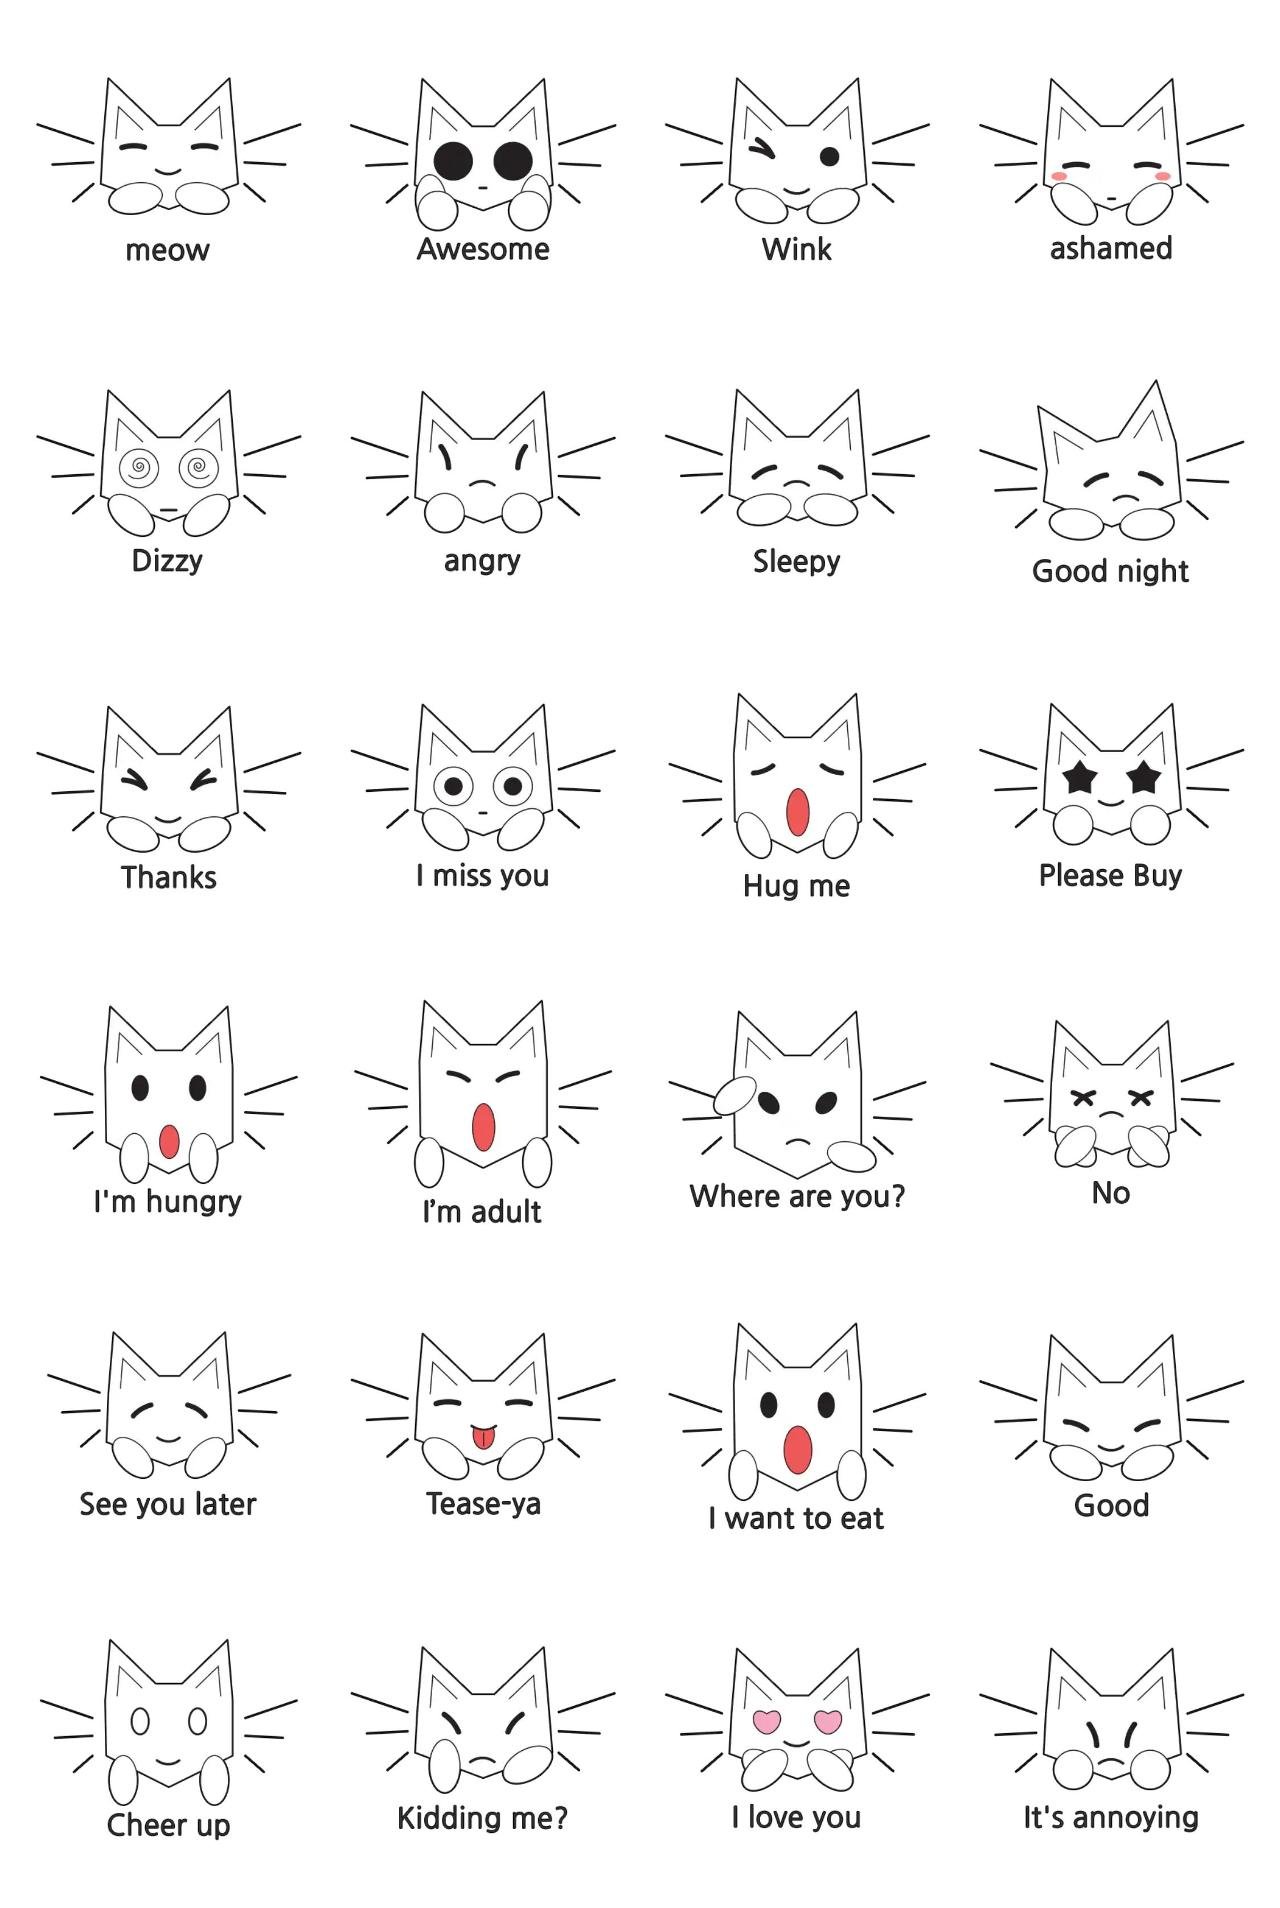 Charm Cat cute Kiong-i Animals,Etc. sticker pack for Whatsapp, Telegram, Signal, and others chatting and message apps